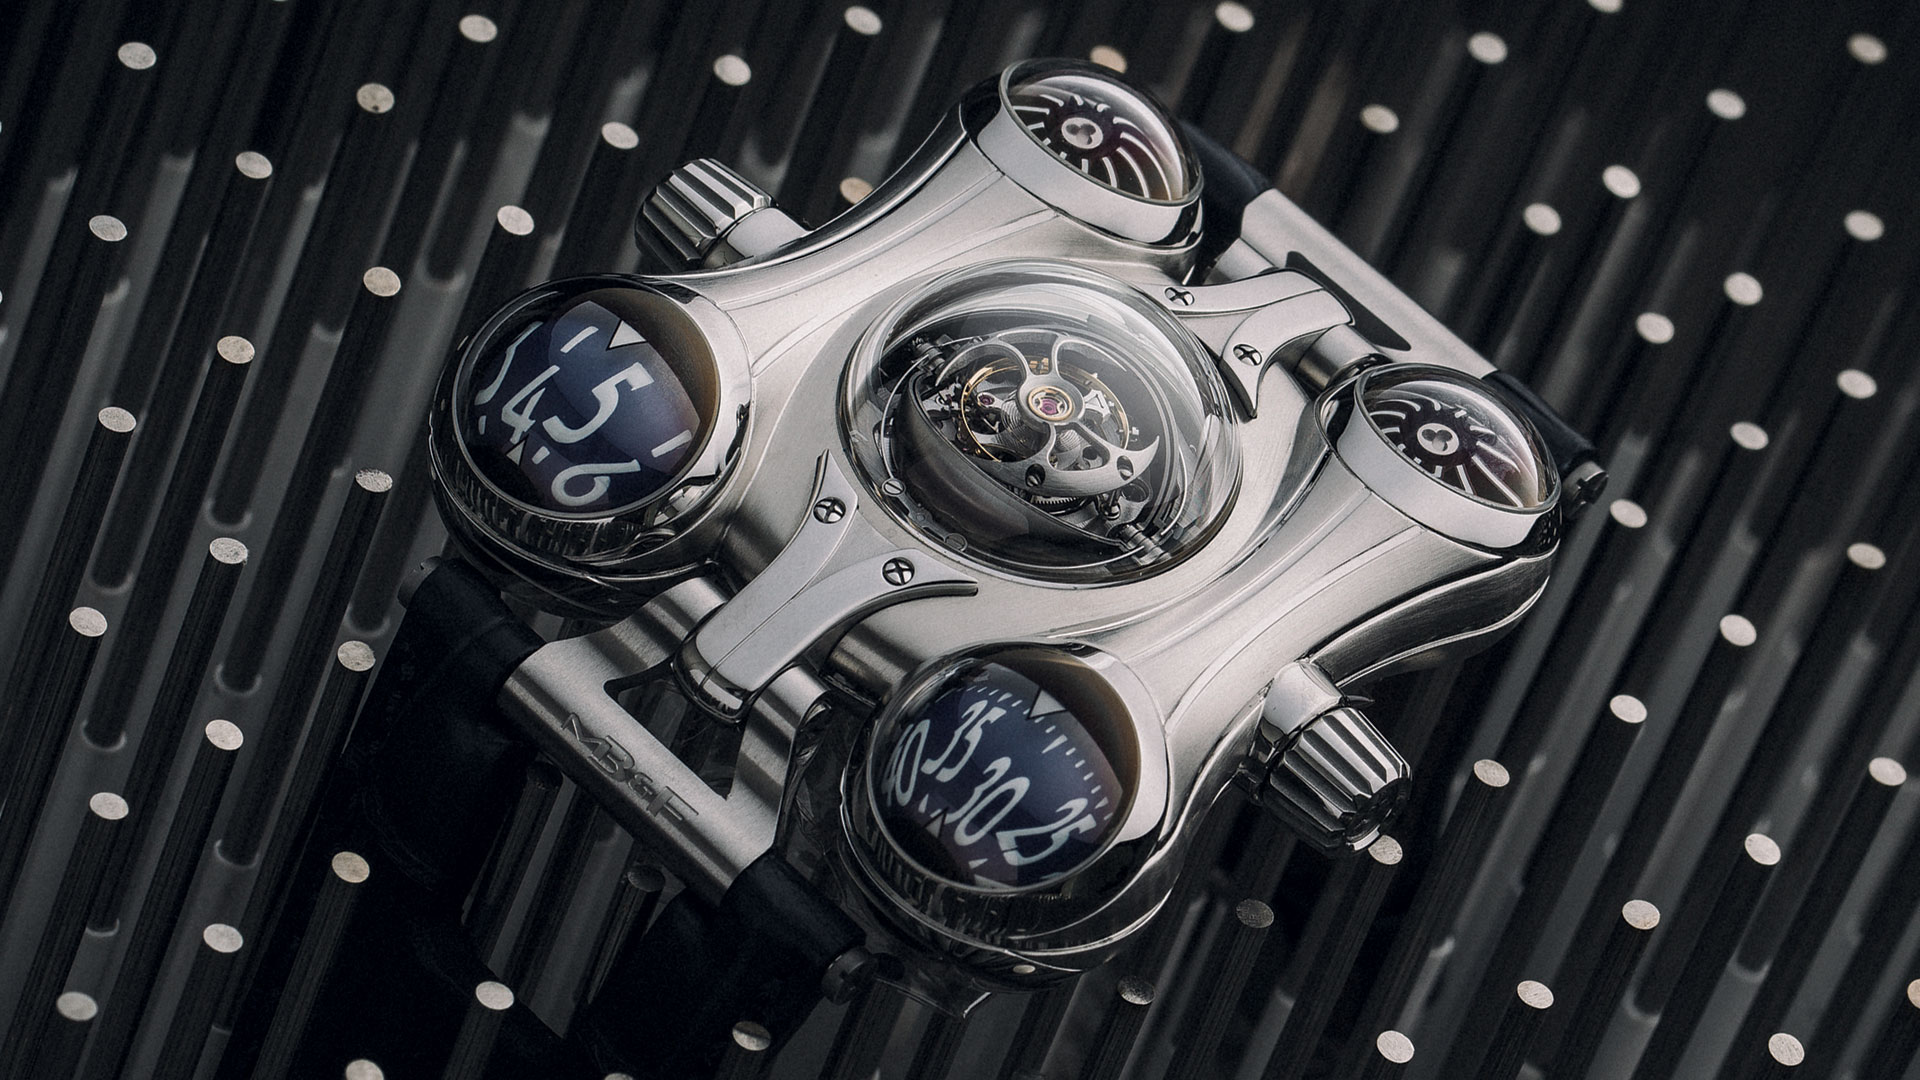 MB&F HM6 Final Edition Watch In Steel